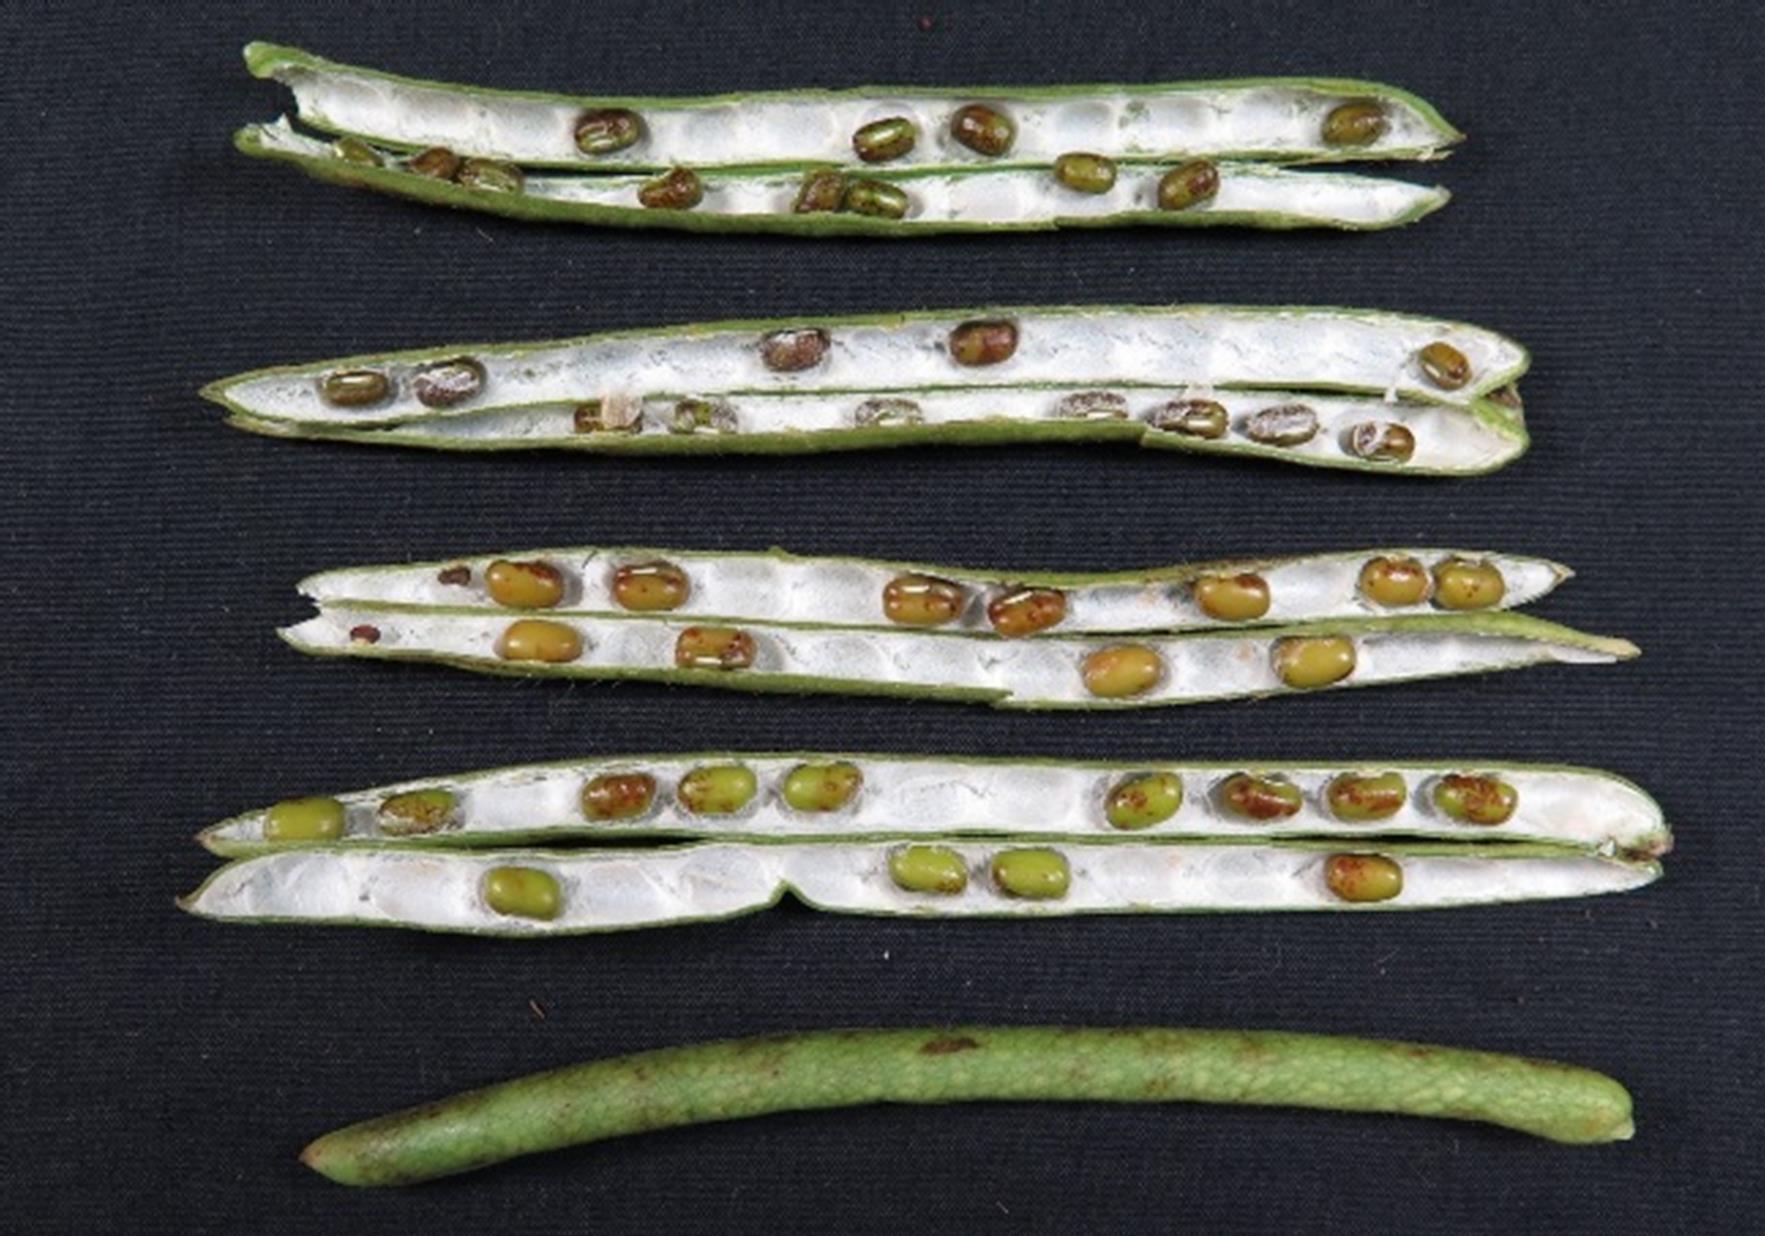 This is a photo of symptoms of puffy pod on mung bean including swollen, soft pods with a green mottled appearance